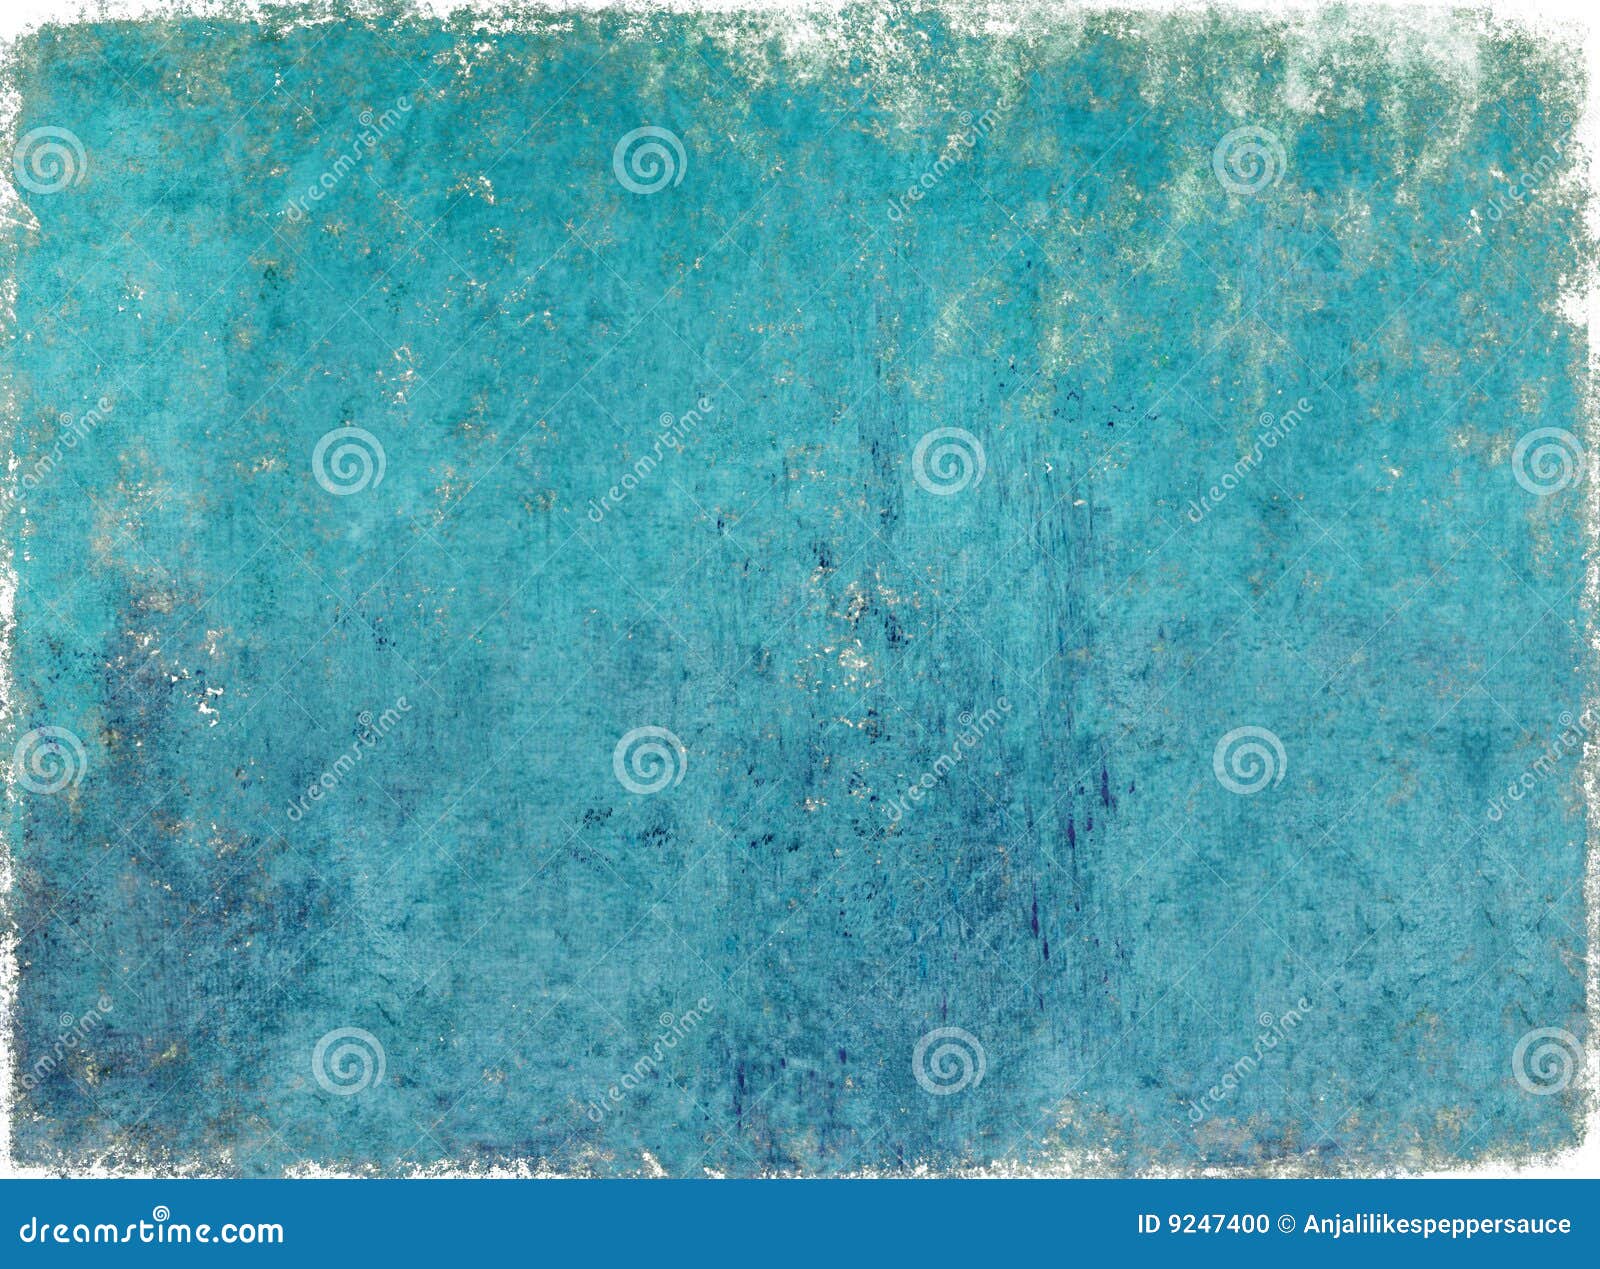 background image with earthy texture